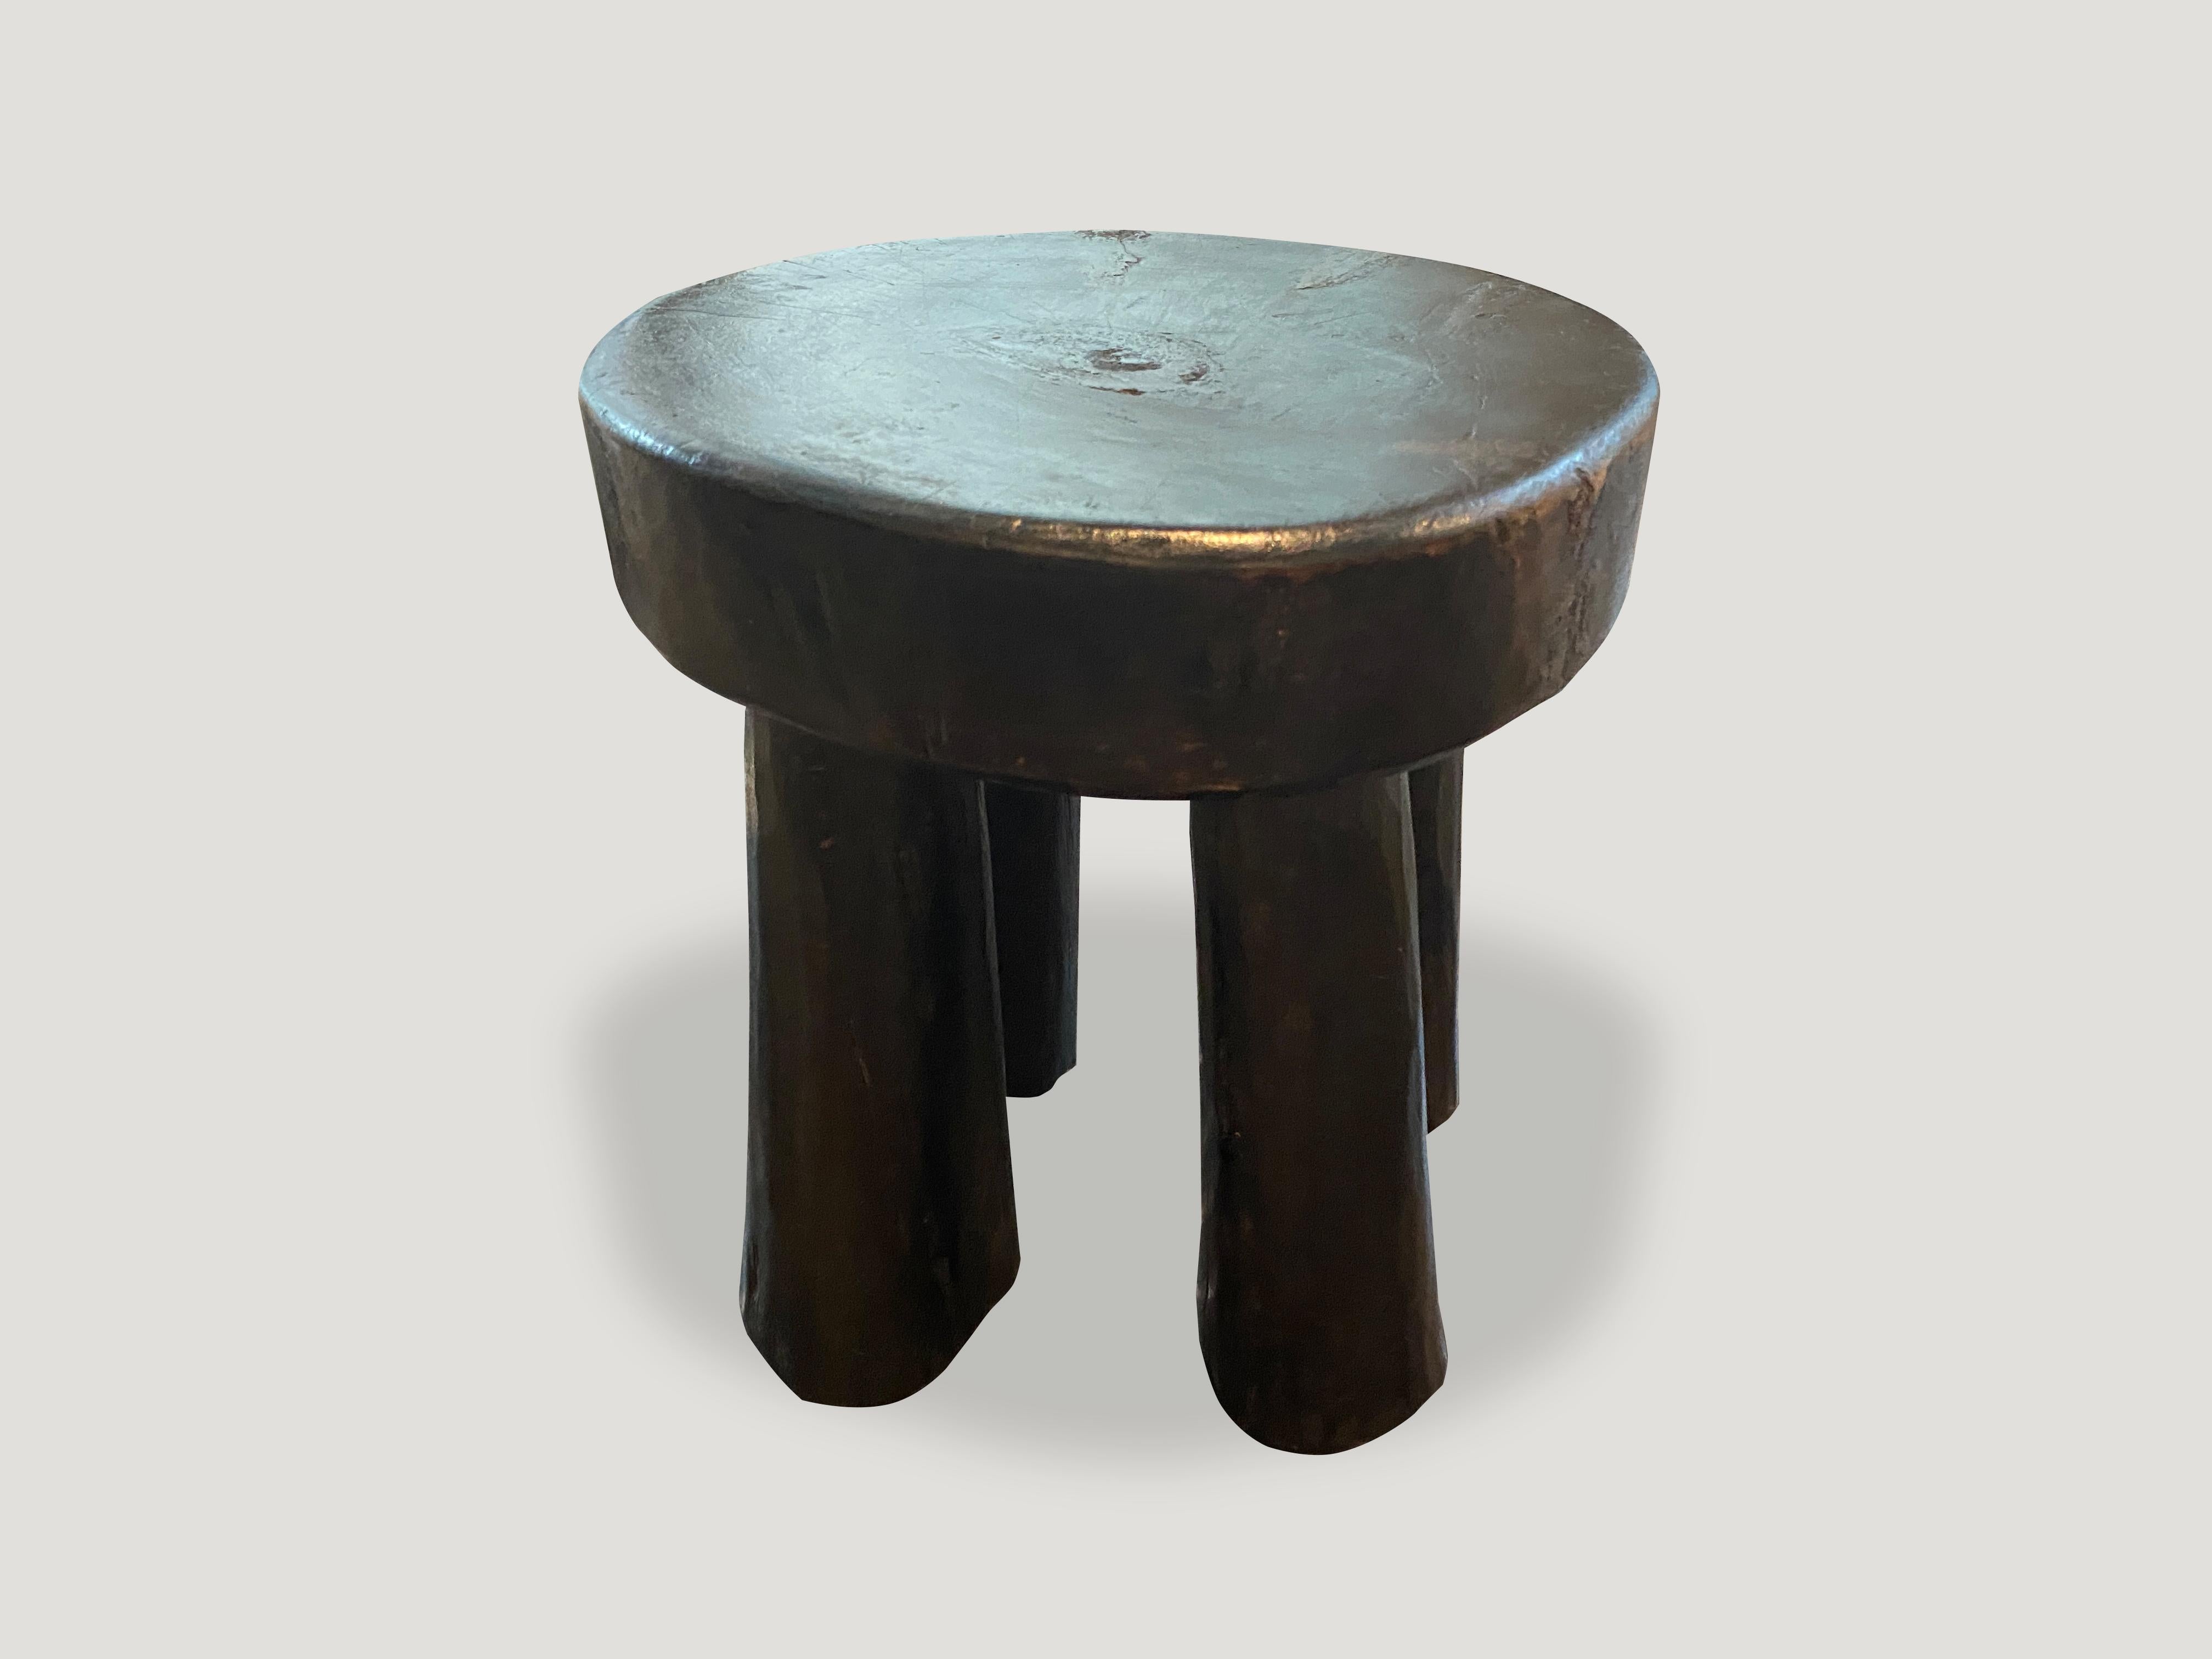 Ivorian Andrianna Shamaris African Wood Side Table or Stool